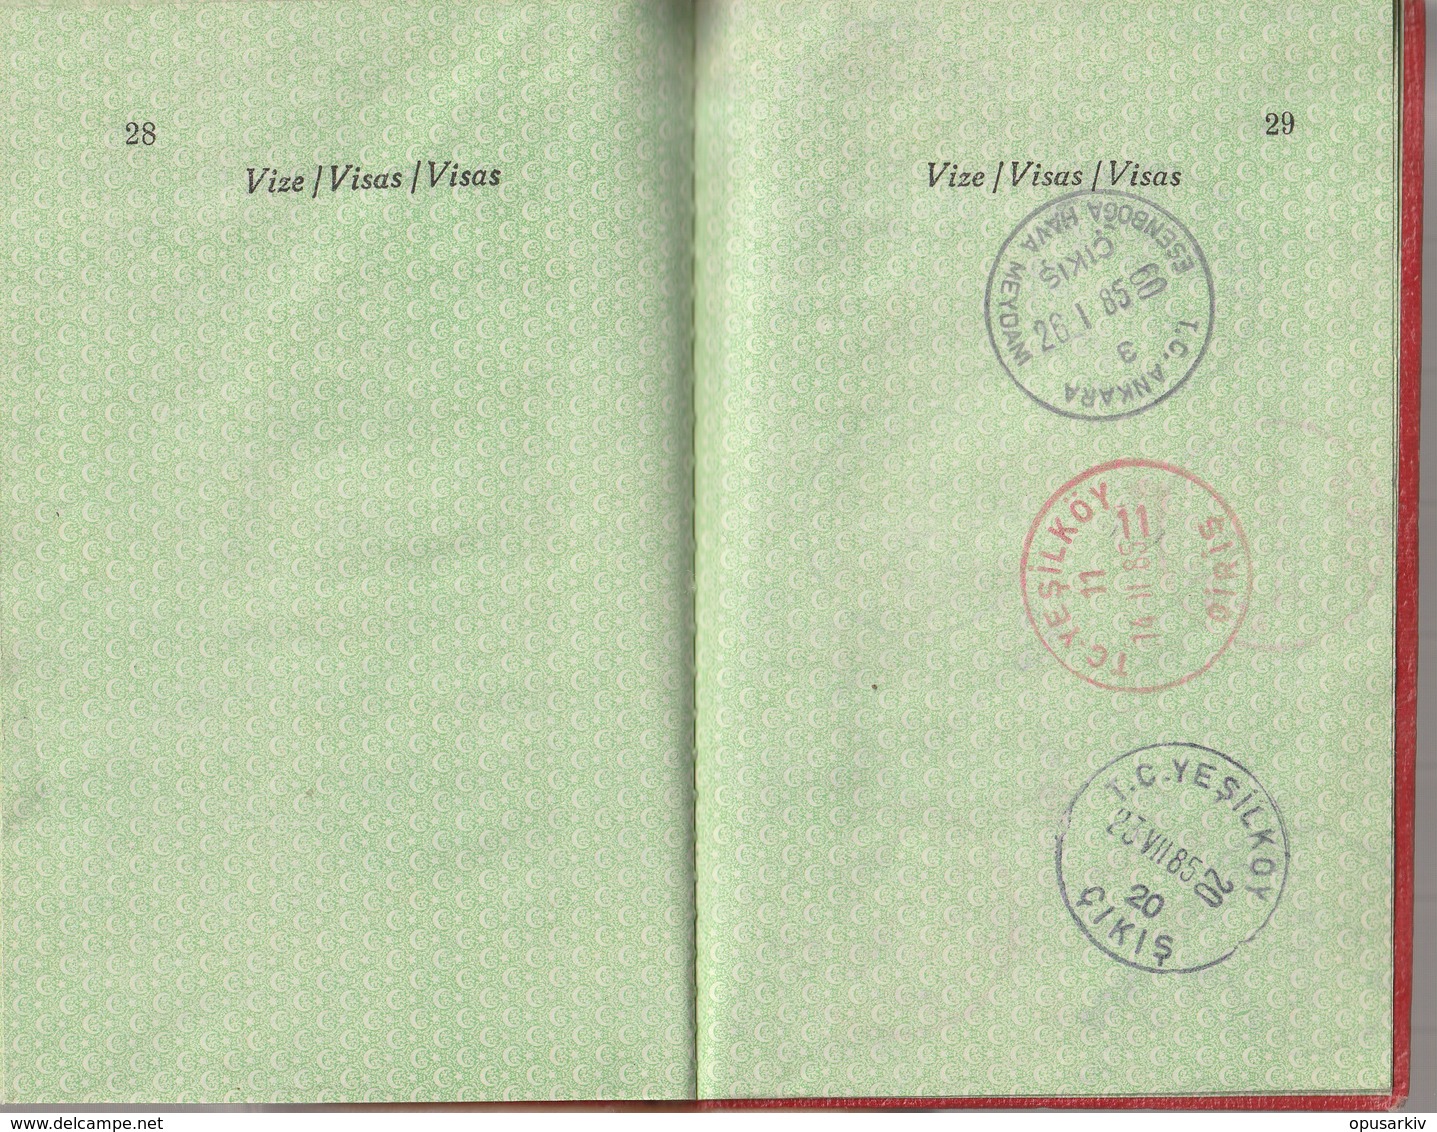 [Country/Documents] - Turkey - 1984 - Diplomatic Passport - Used